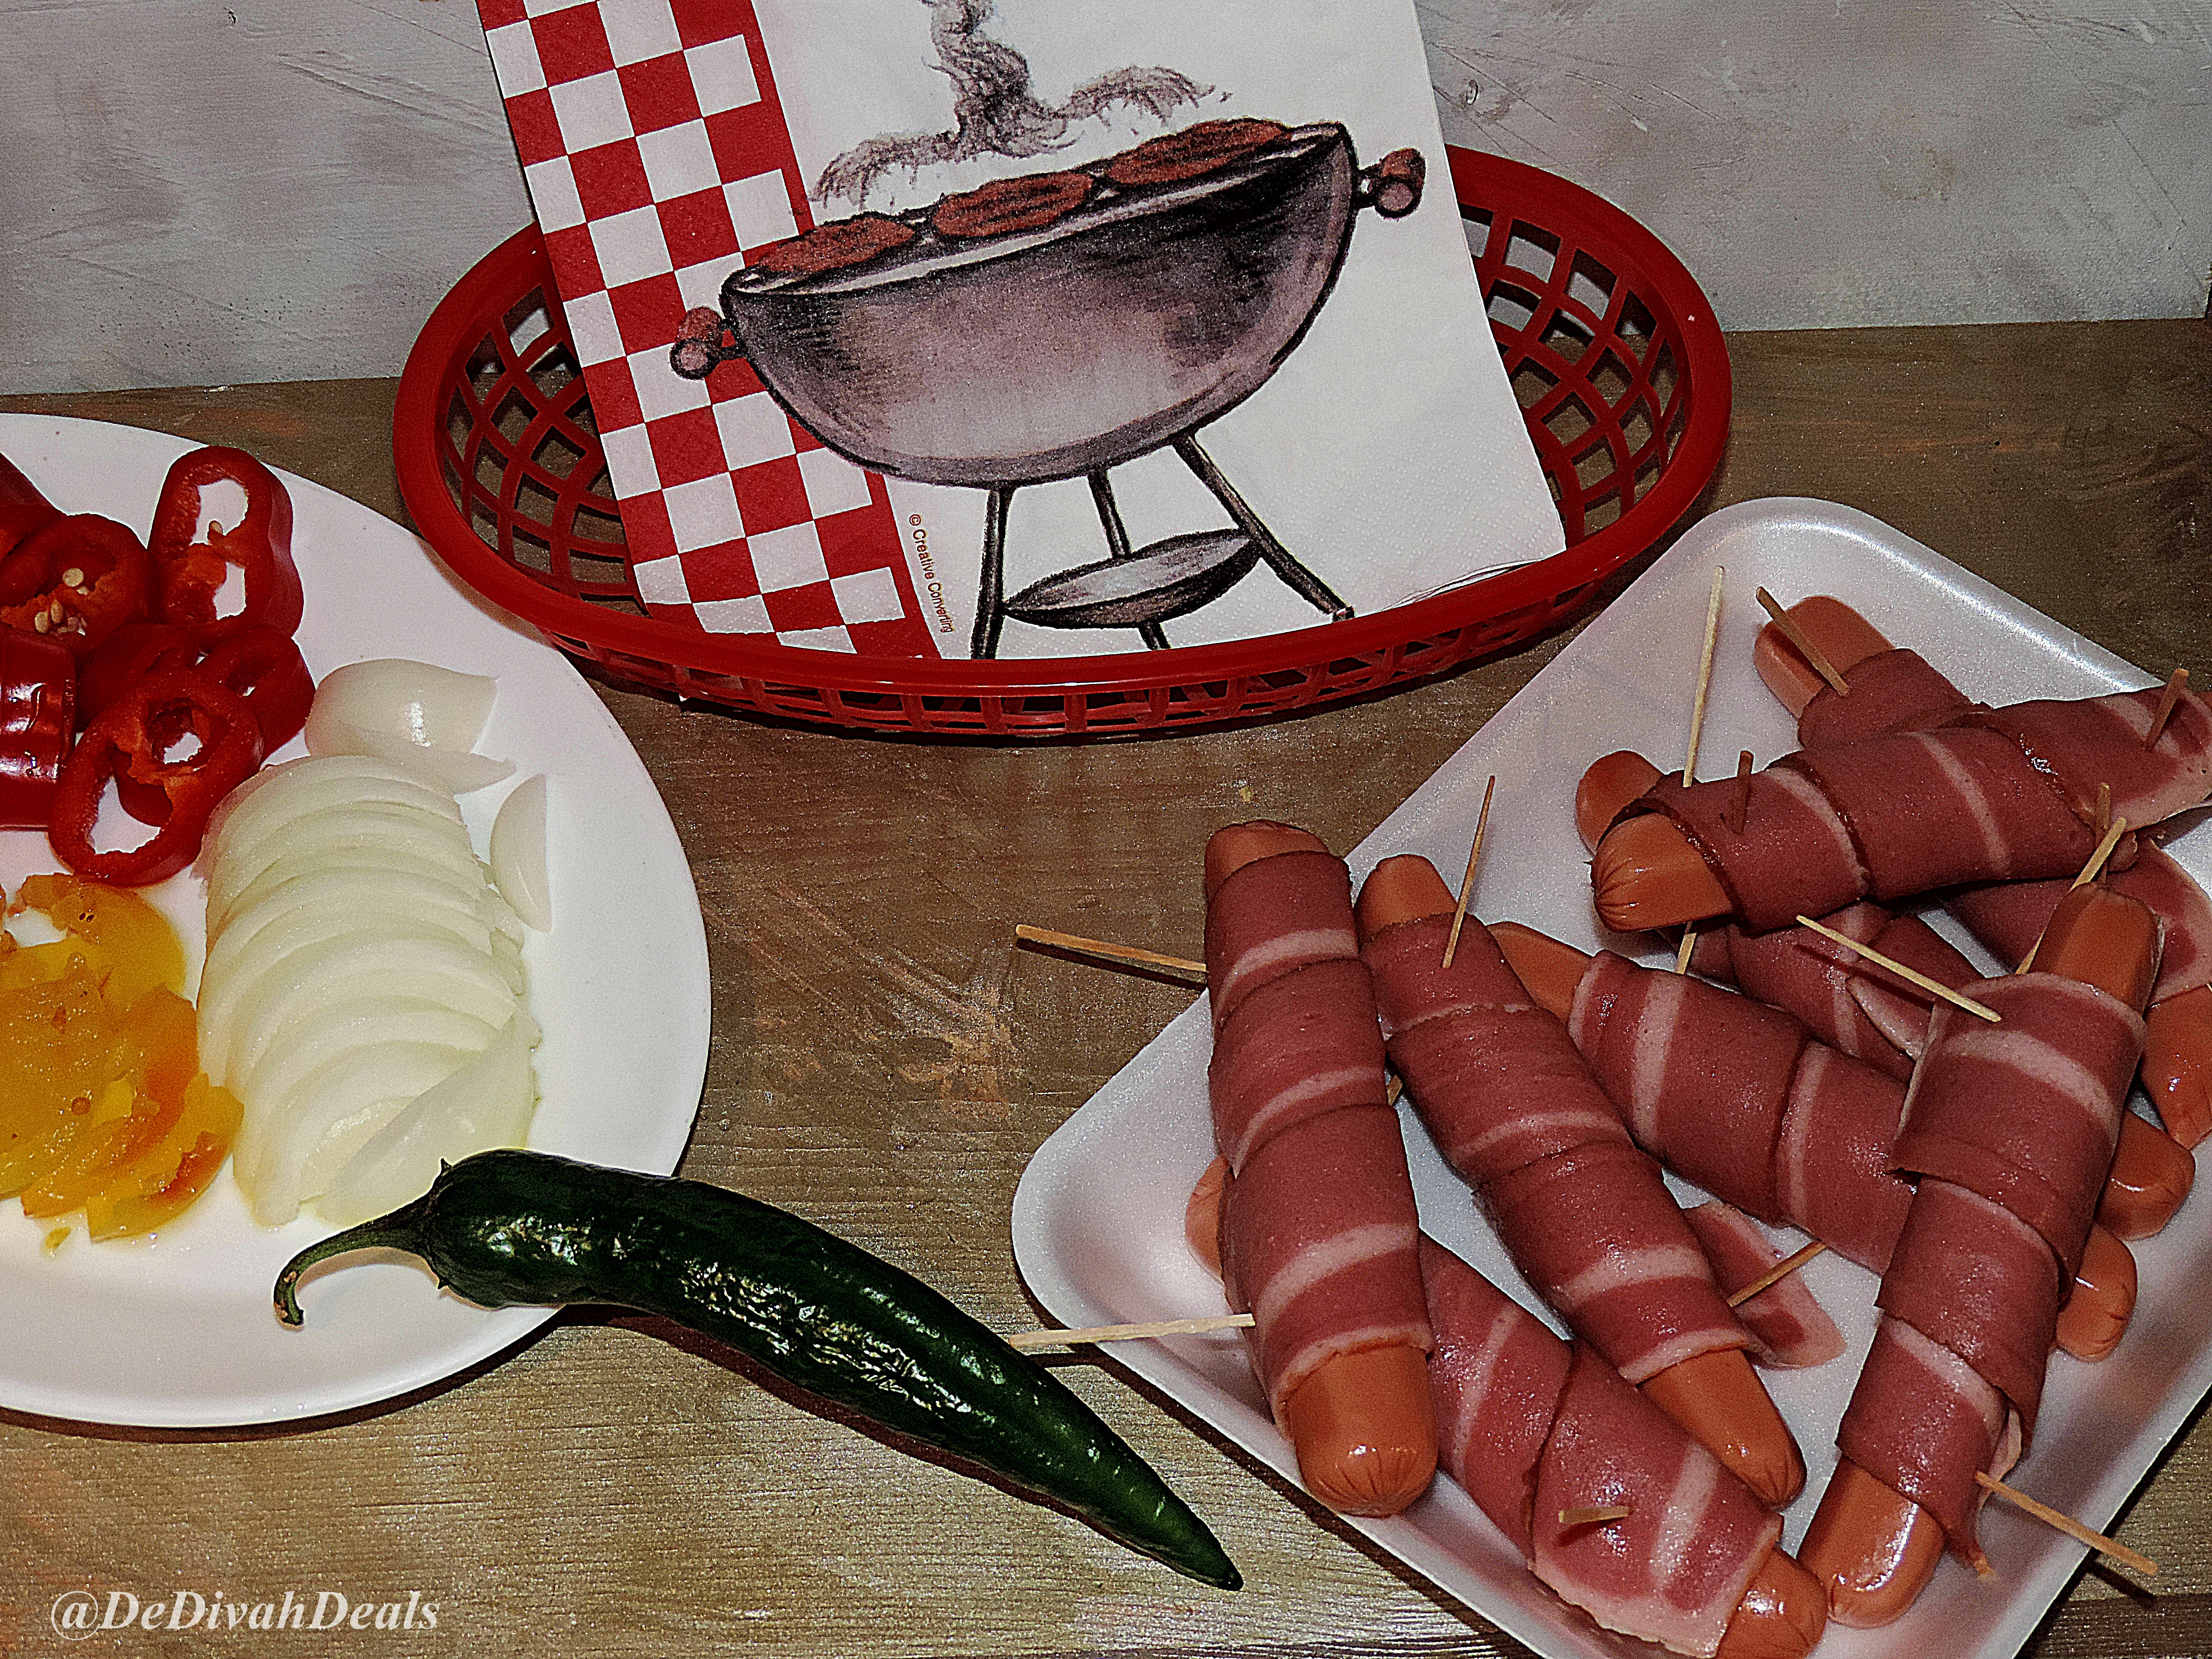 Turkey Hot Dogs
 Switch To Turkey Hot Dogs wrapped with Bacon DeDivahDeals